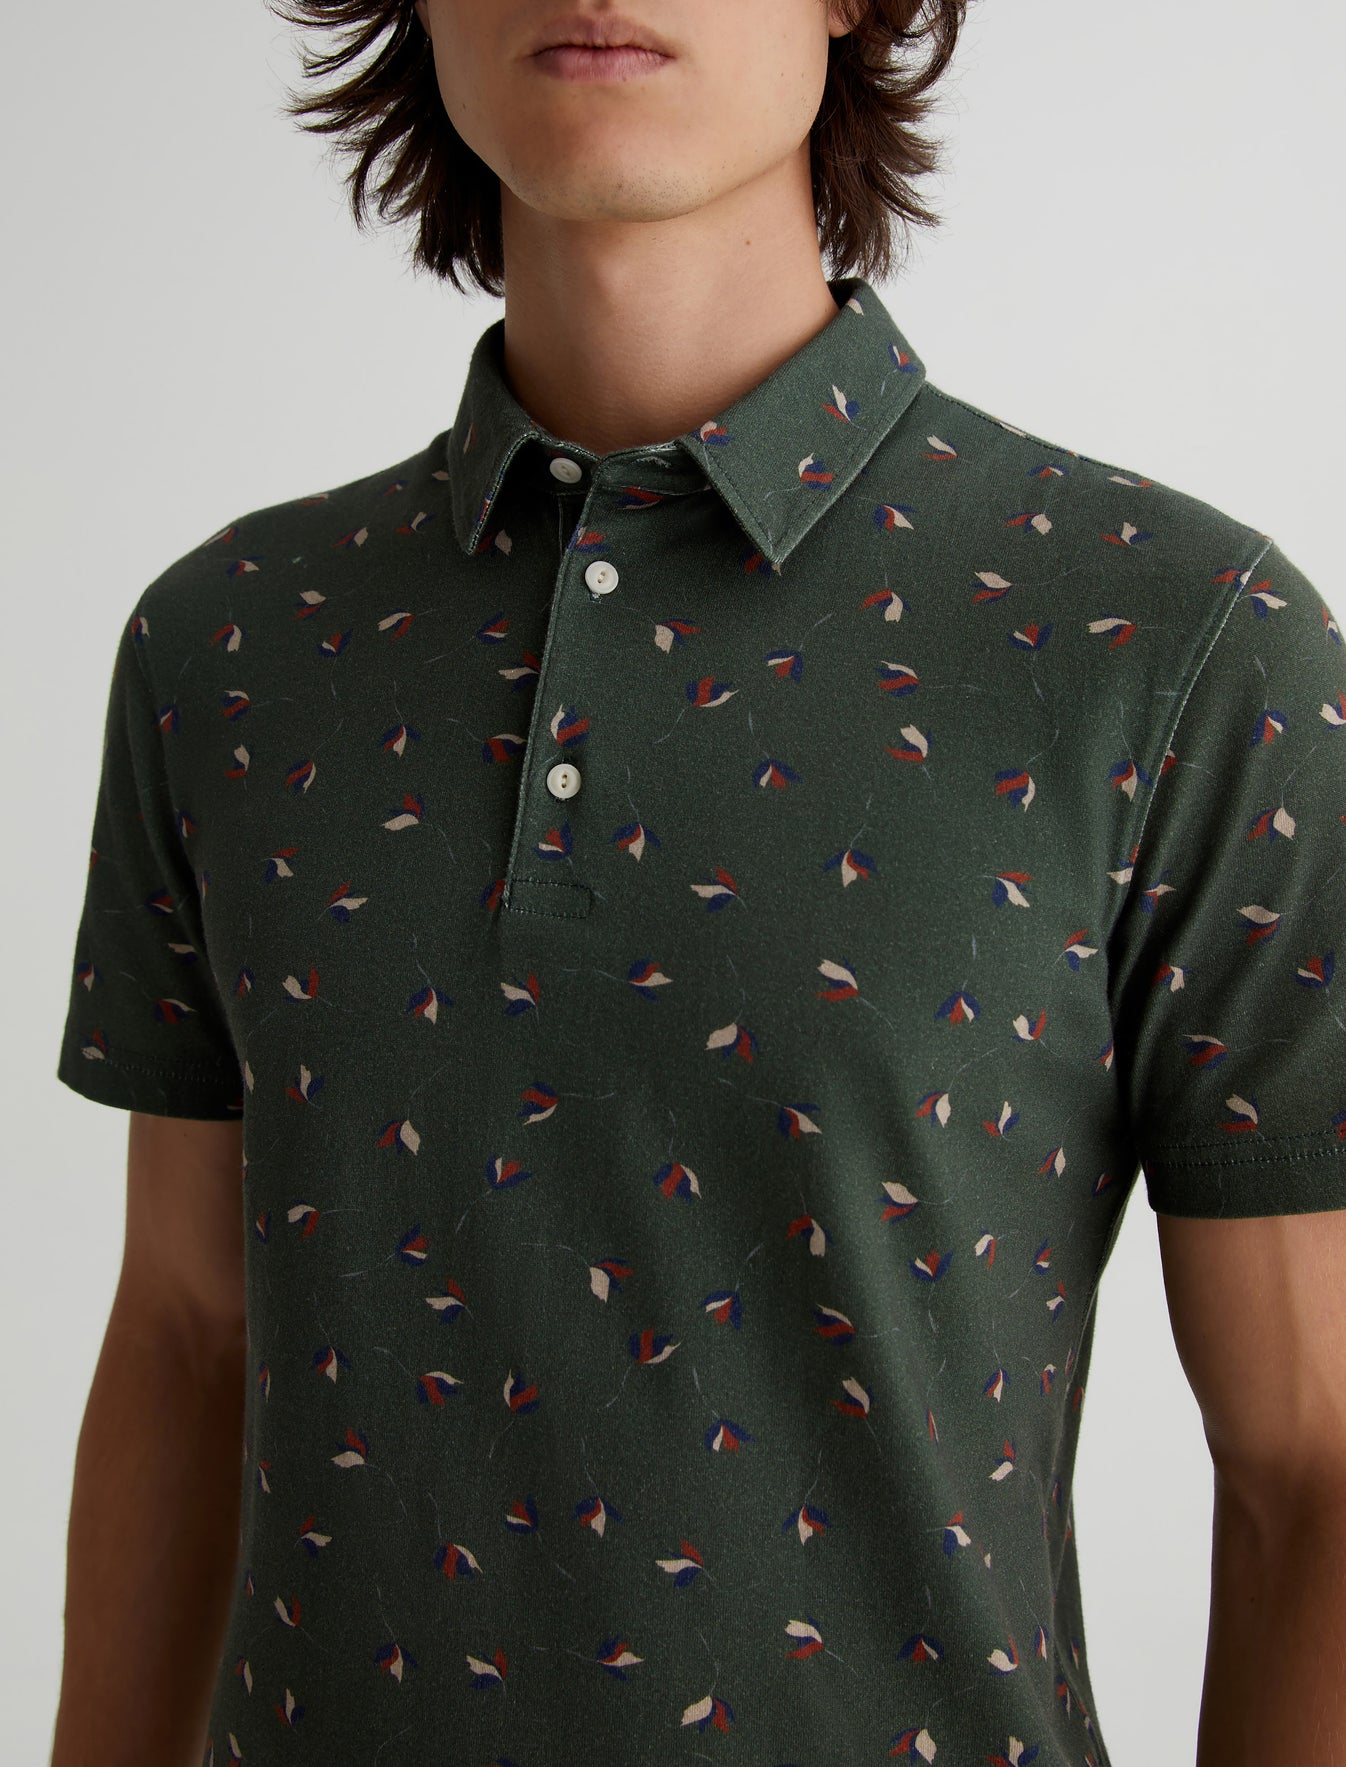 Bryce S/S Polo Fallen Leaves Green Multi Classic Fit Short Sleeve Polo T-Shirt Mens Top Photo 2